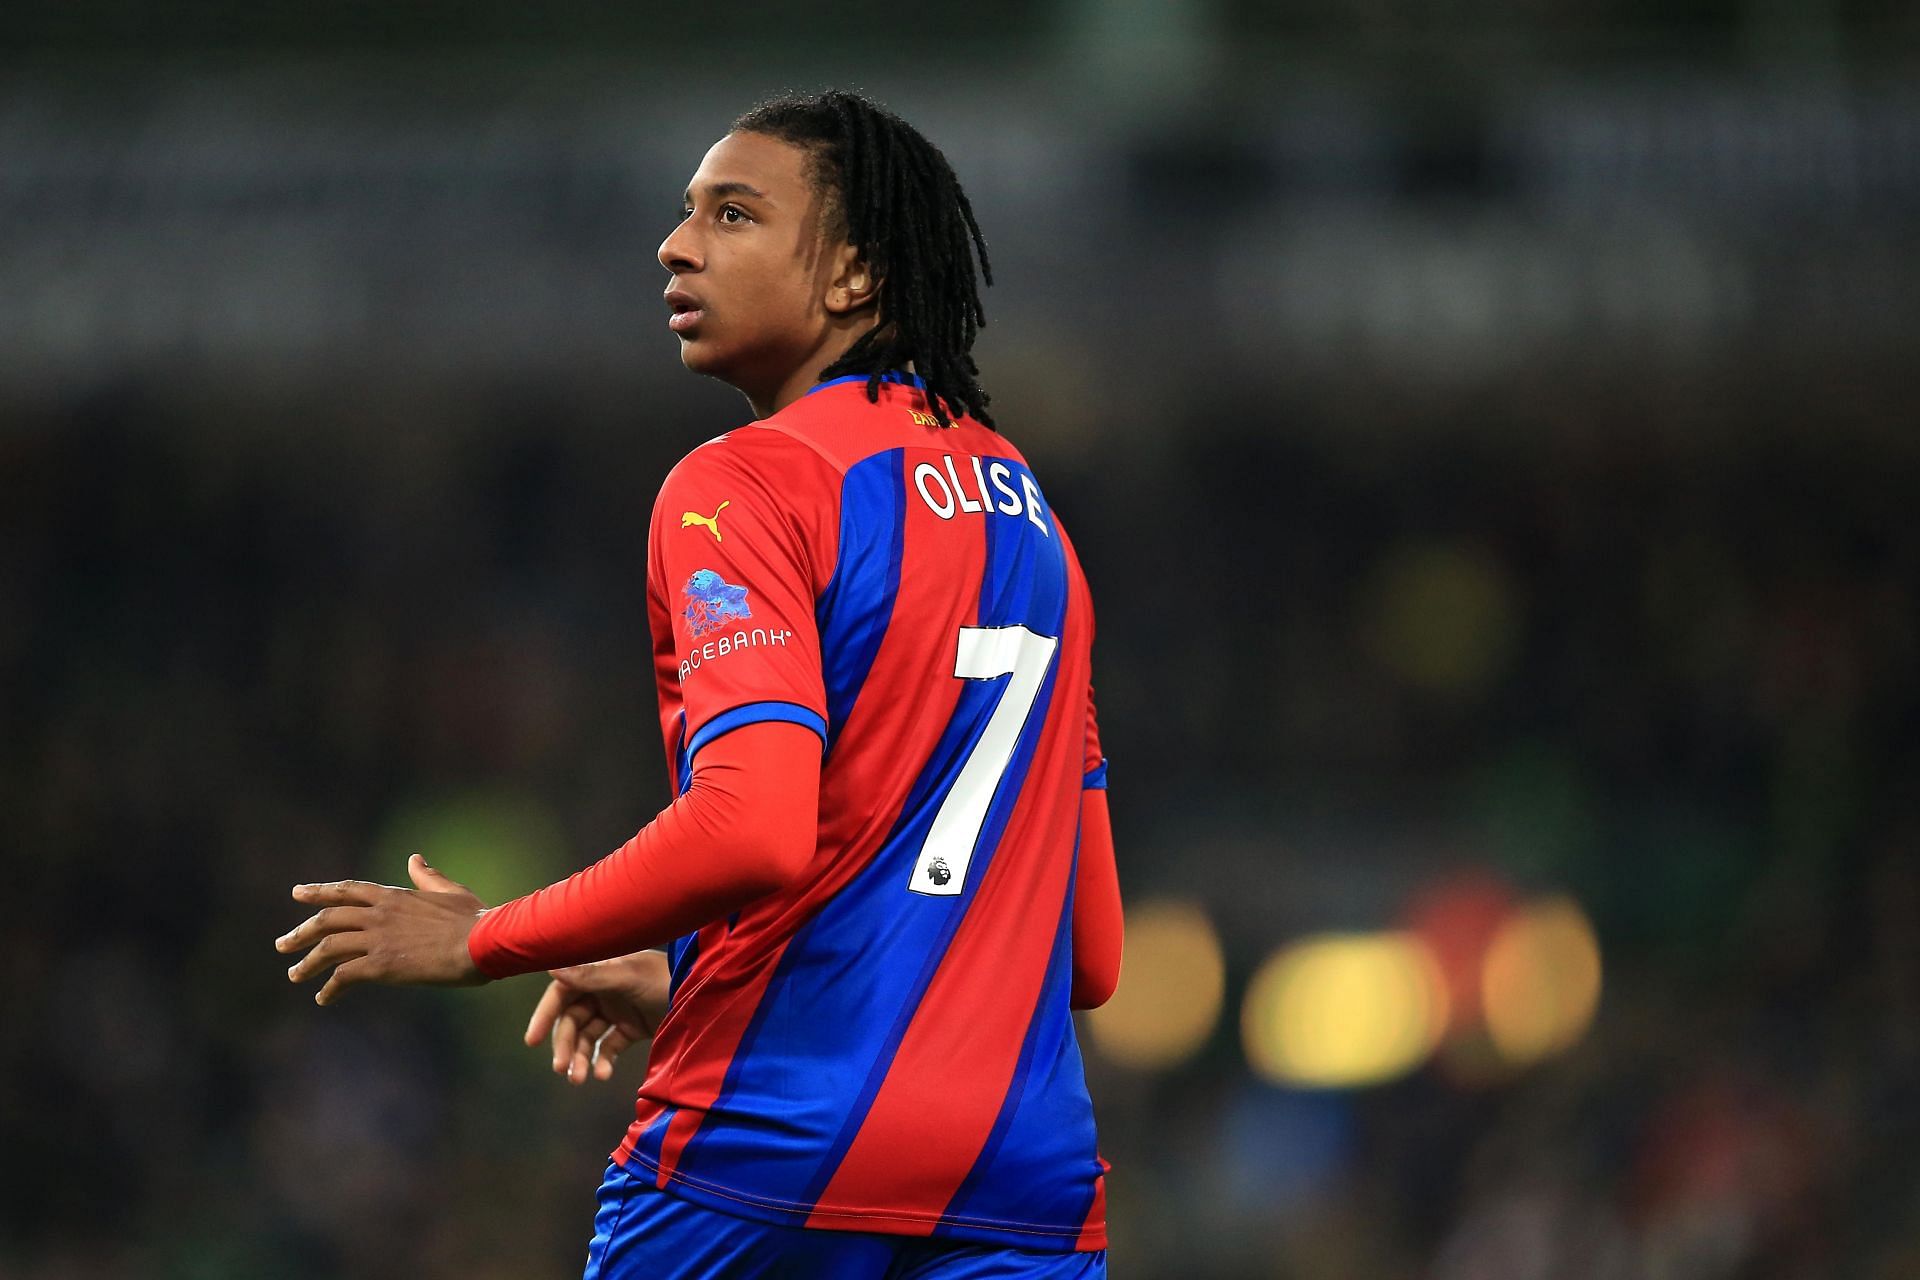 Olise is a promising player at Crystal Palace